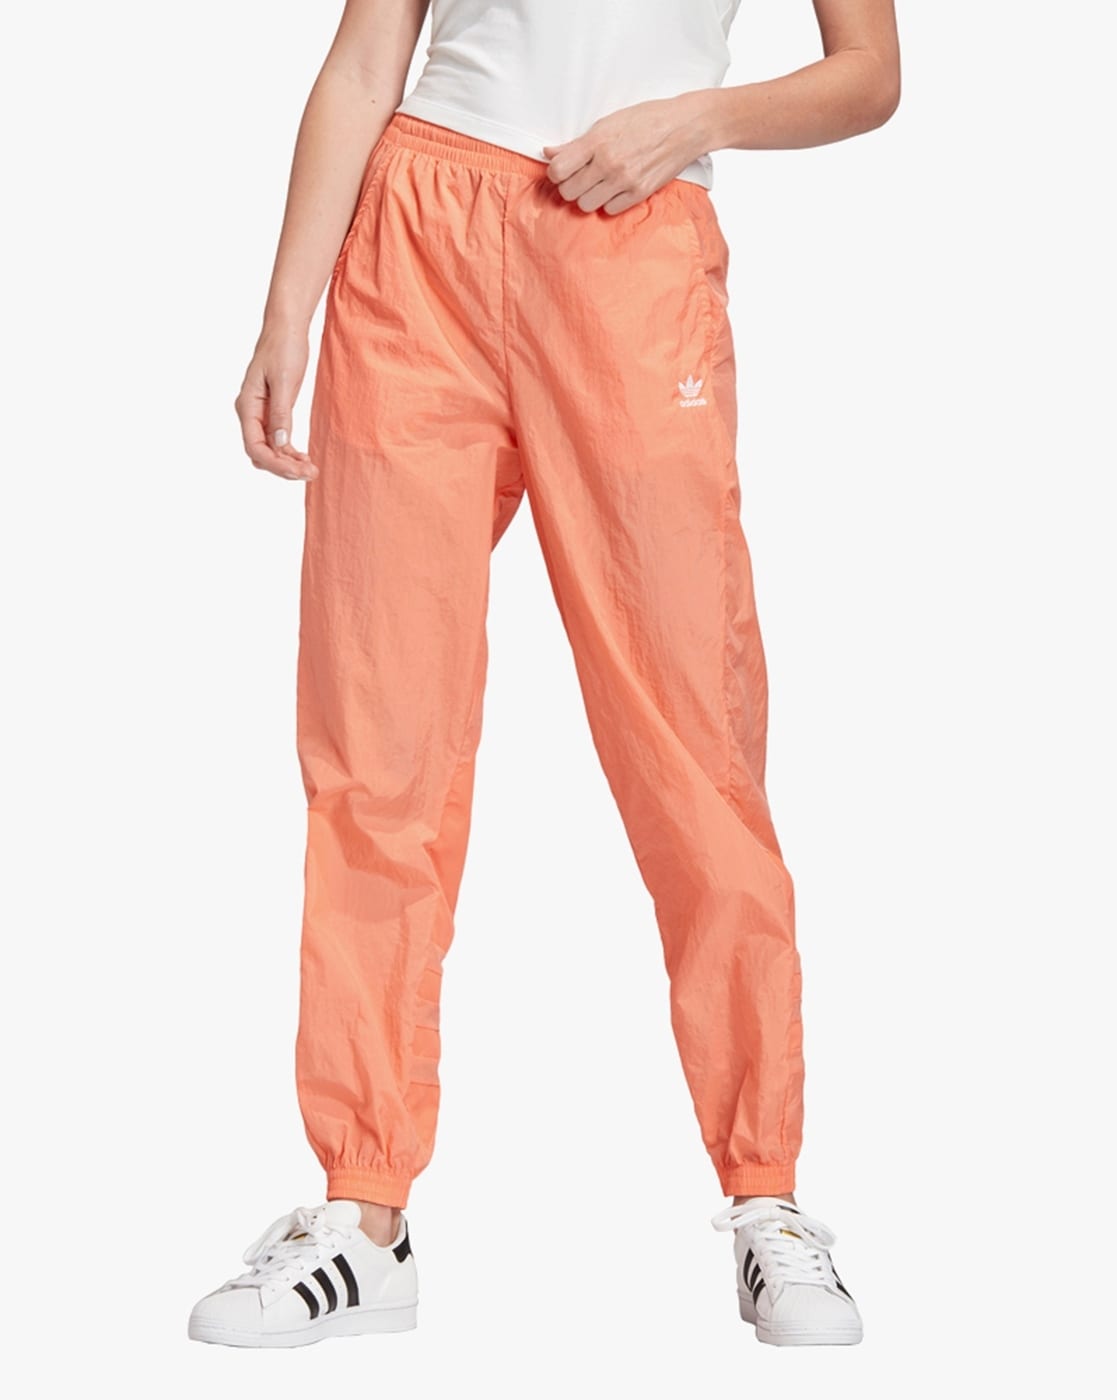 Buy Orange Track Pants for Women by 